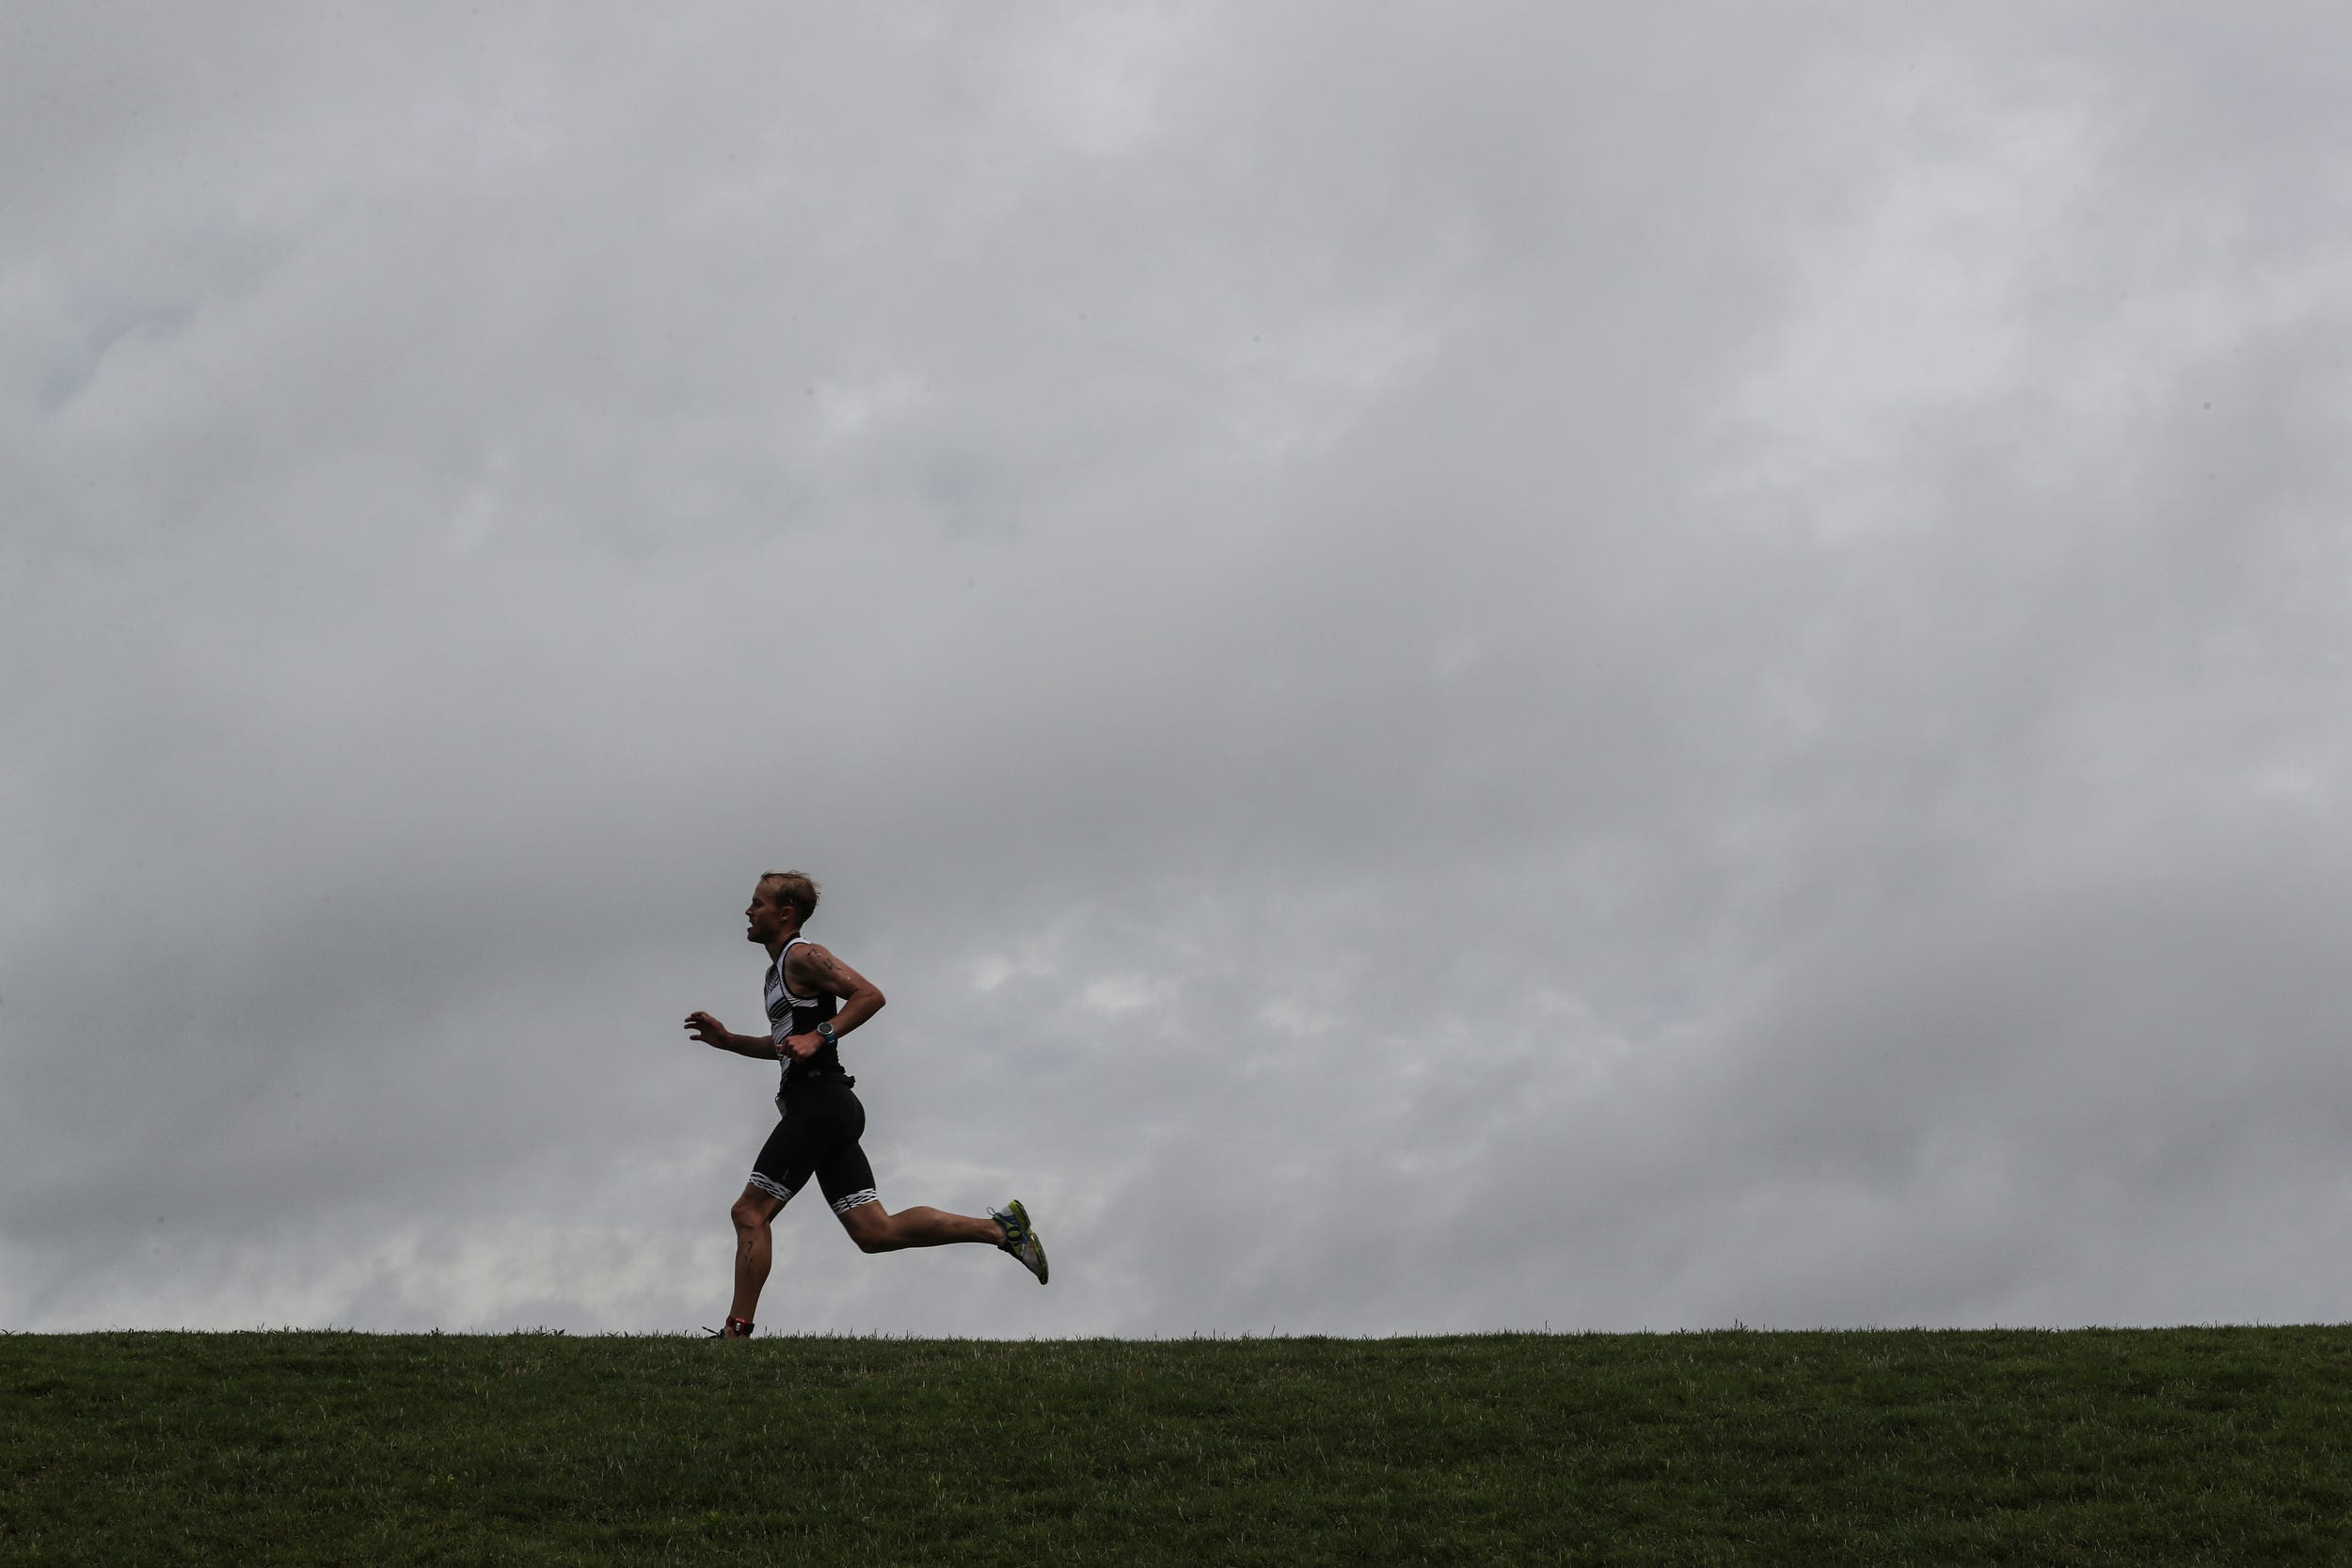 A runner pushes along the final stretch of the course during the 2019 Memphis in May triathlon at Edmund Orgill Park in Millington on Sunday, May 19, 2019. Jordan Green and Kirsten Sass were the winners of the annual triathlon.